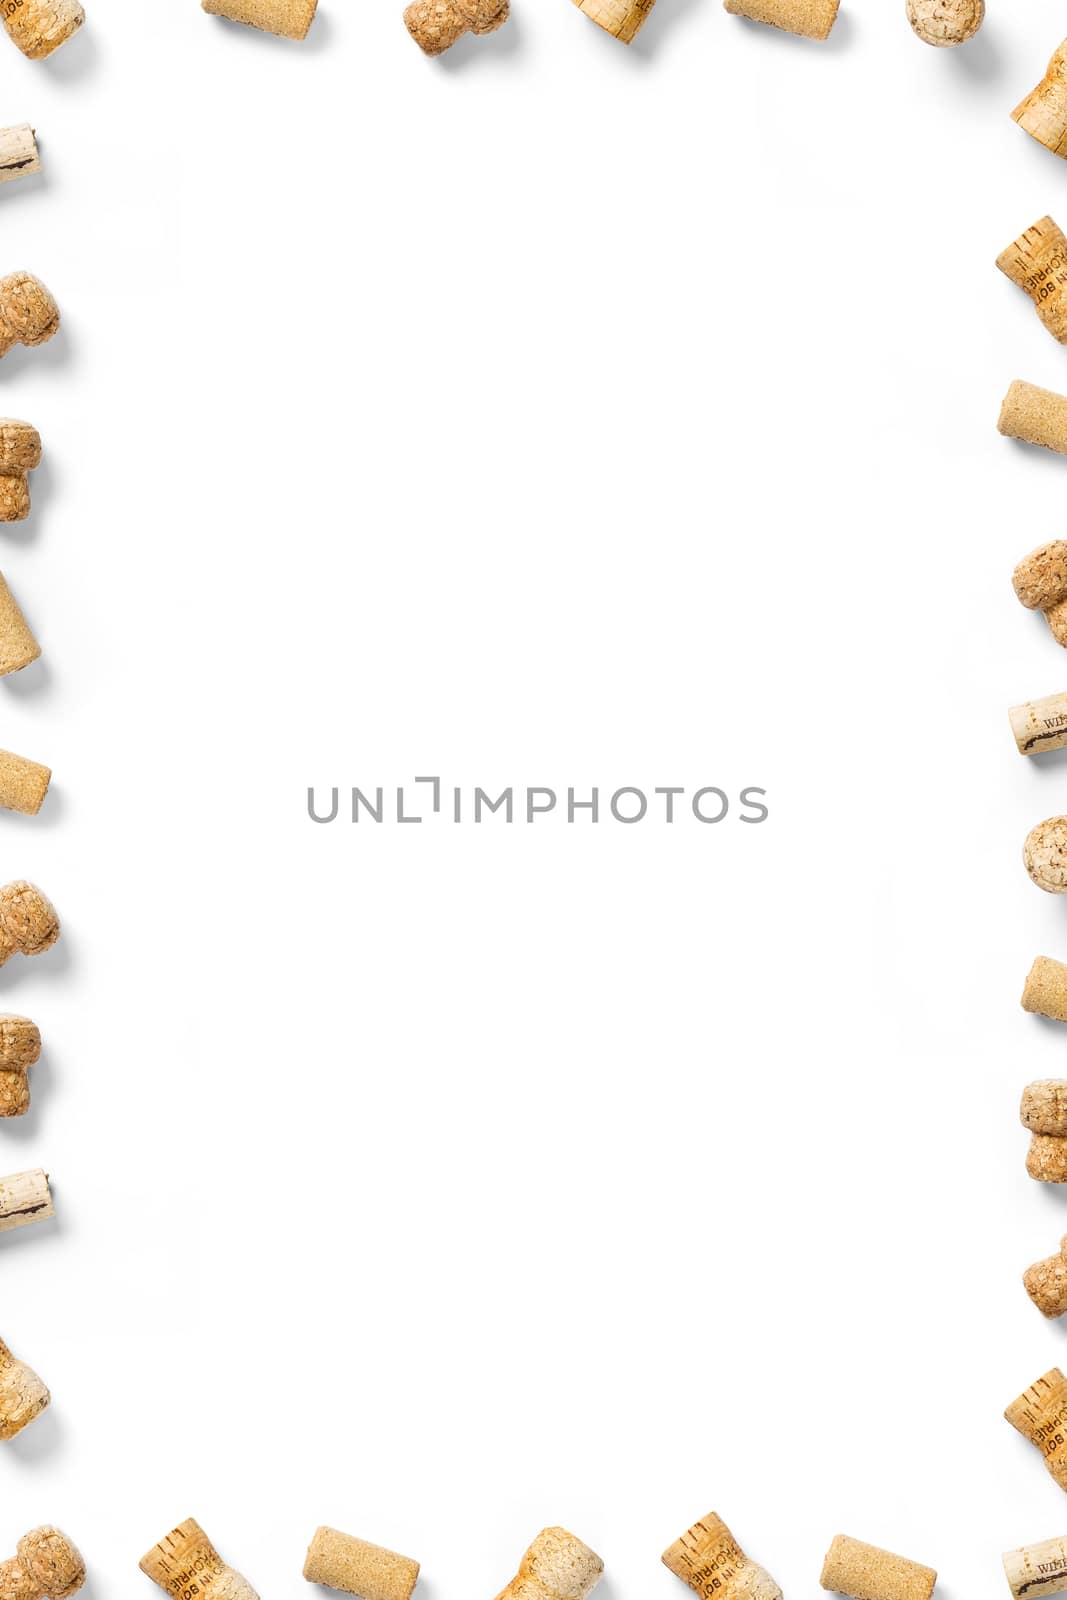 wine corks creative flat lay layout on a white backlit background. flatlay creative wine set with corks and corkscrew for design concept